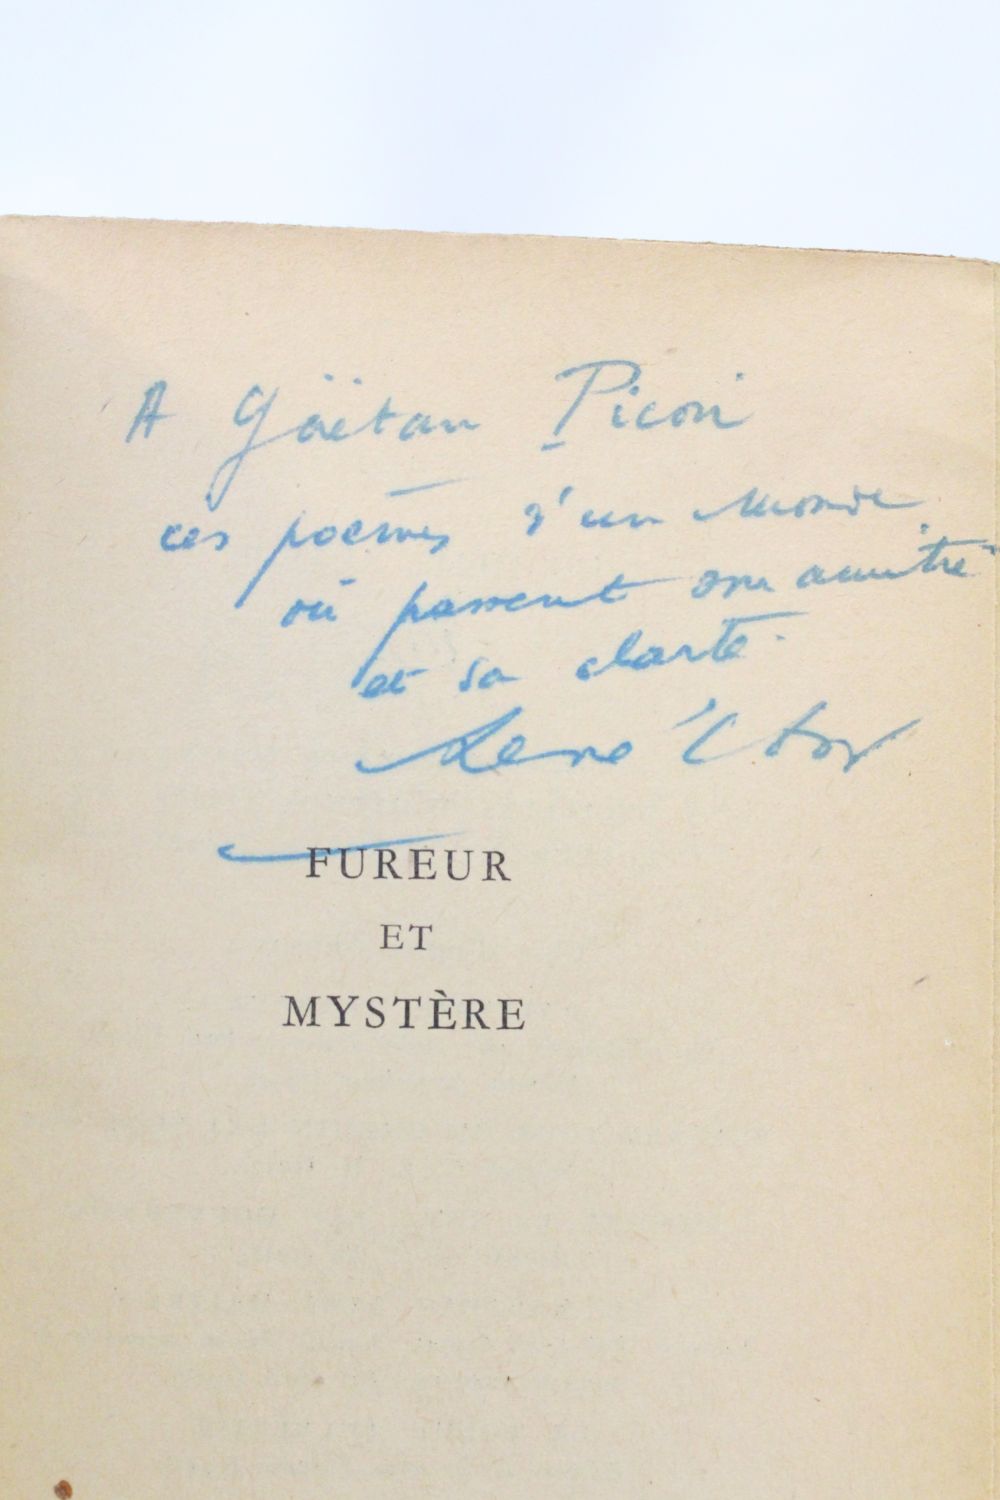 CHAR : Fureur et mystère - Signed book, First edition - Edition ...